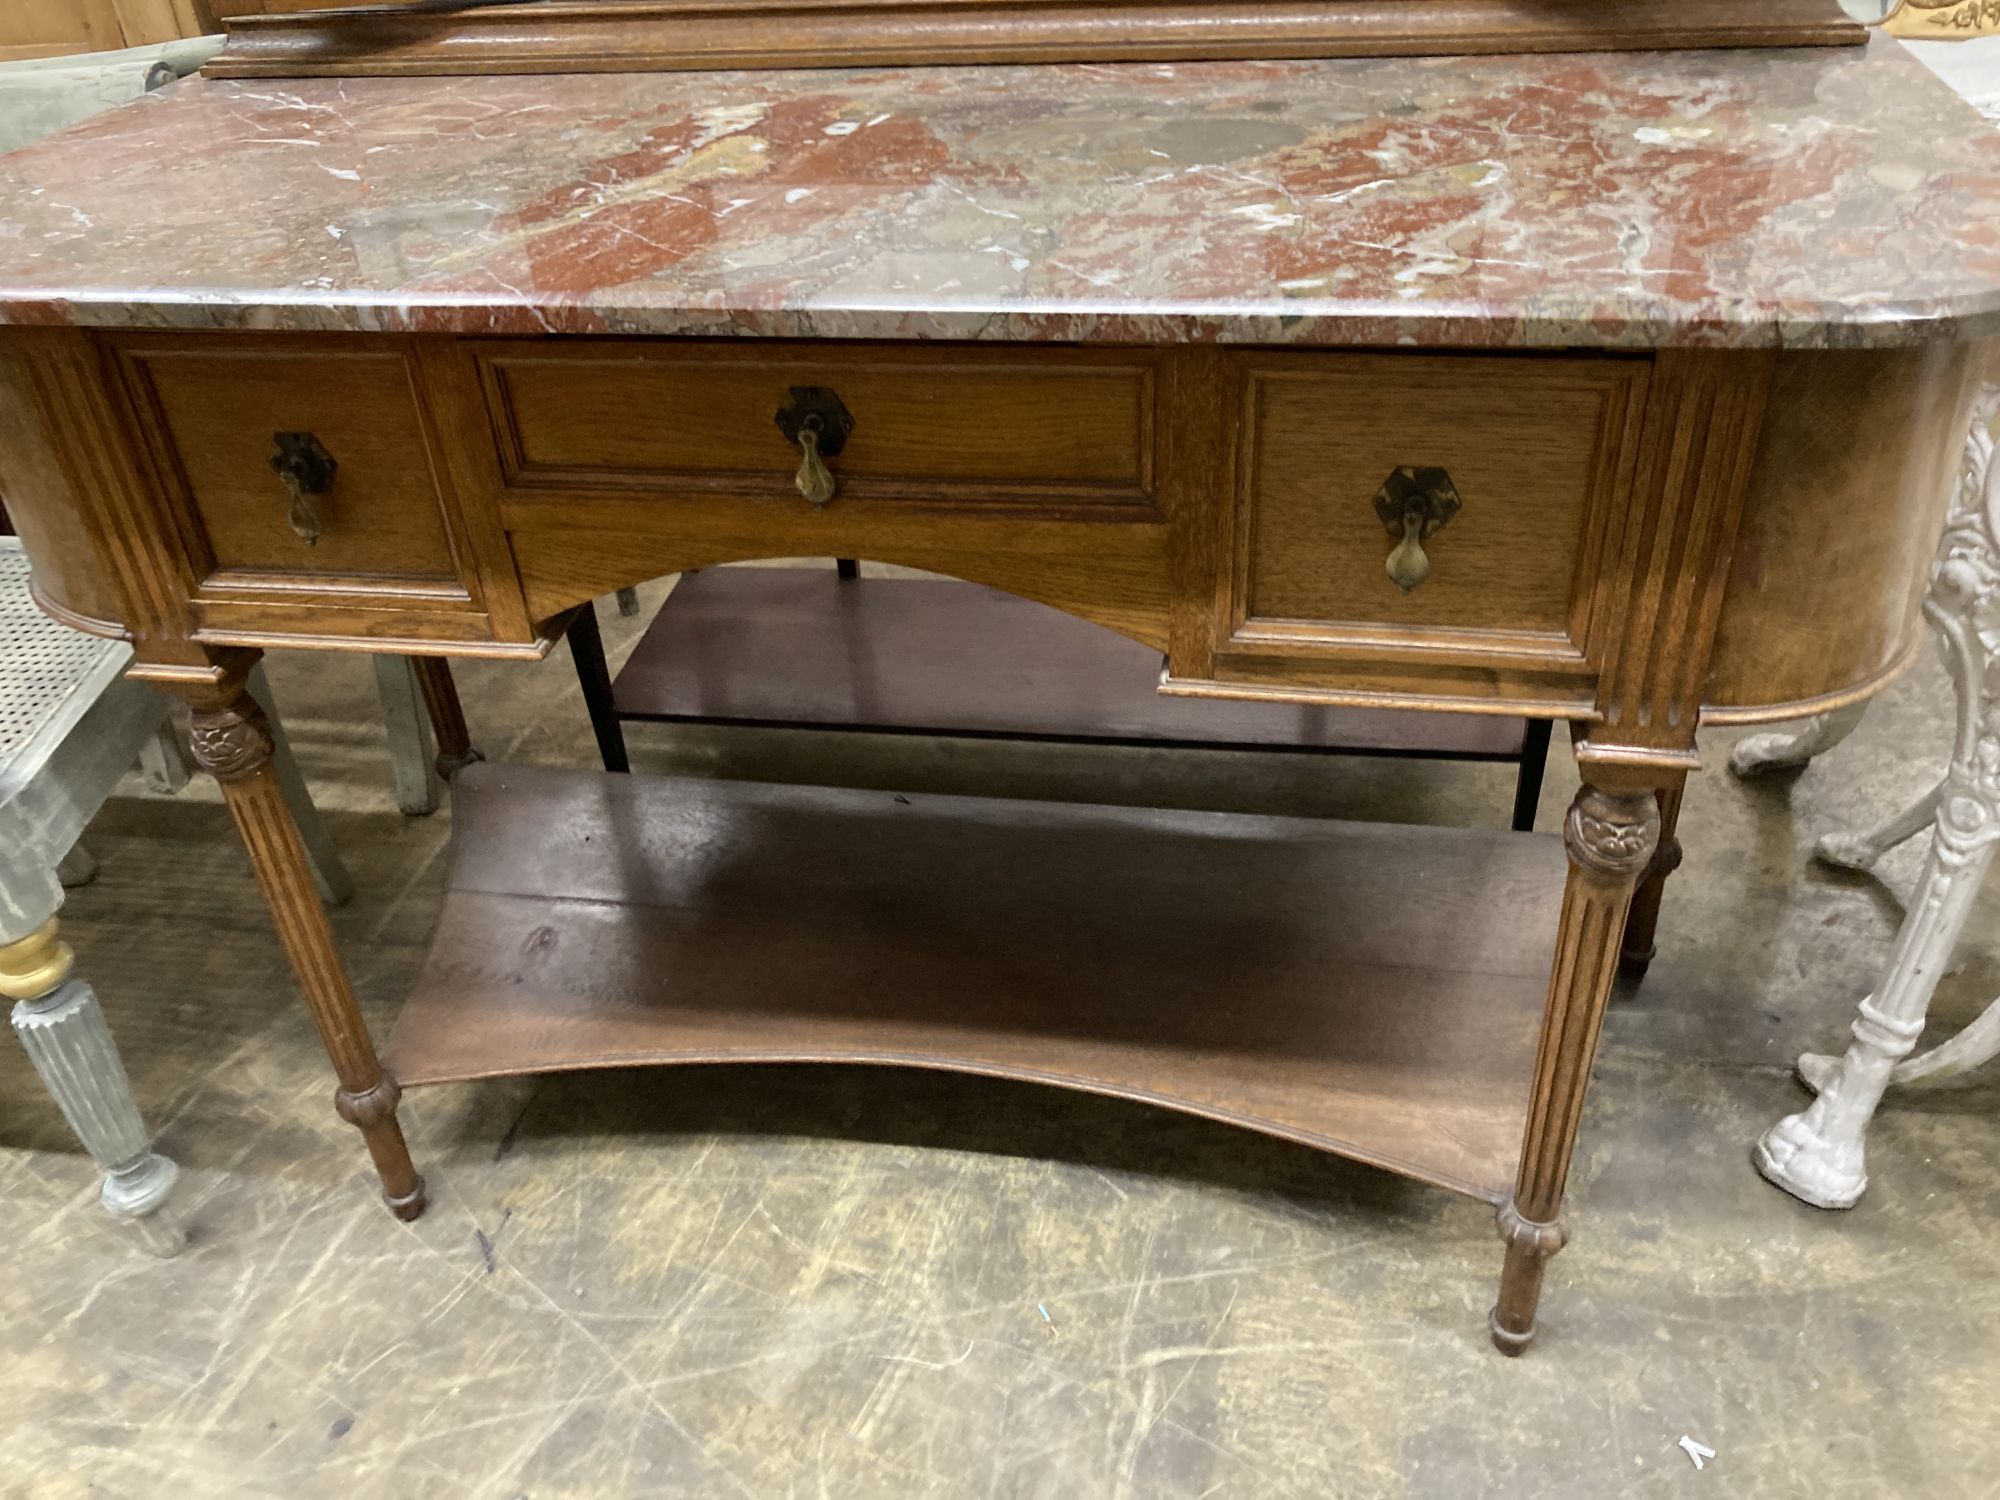 An early 20th century French marble topped mirror back dressing table, length 127cm, depth 55cm, height 182cm